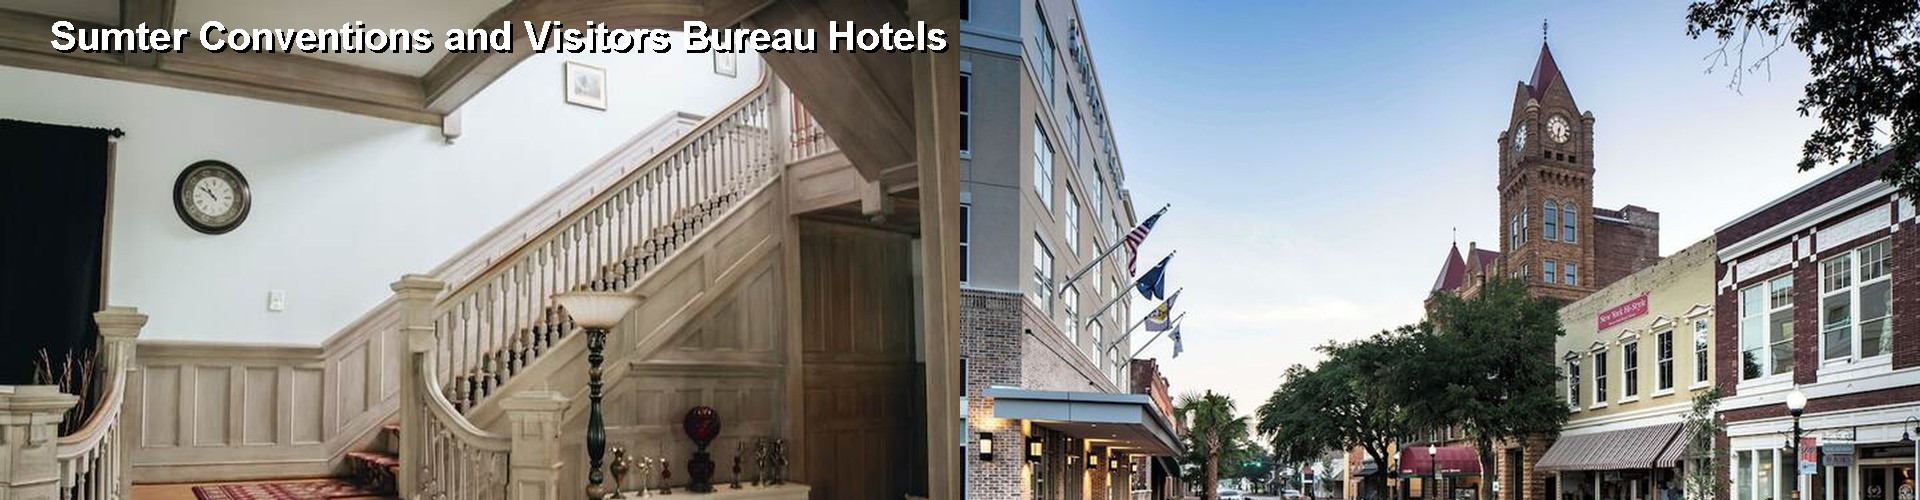 4 Best Hotels near Sumter Conventions and Visitors Bureau